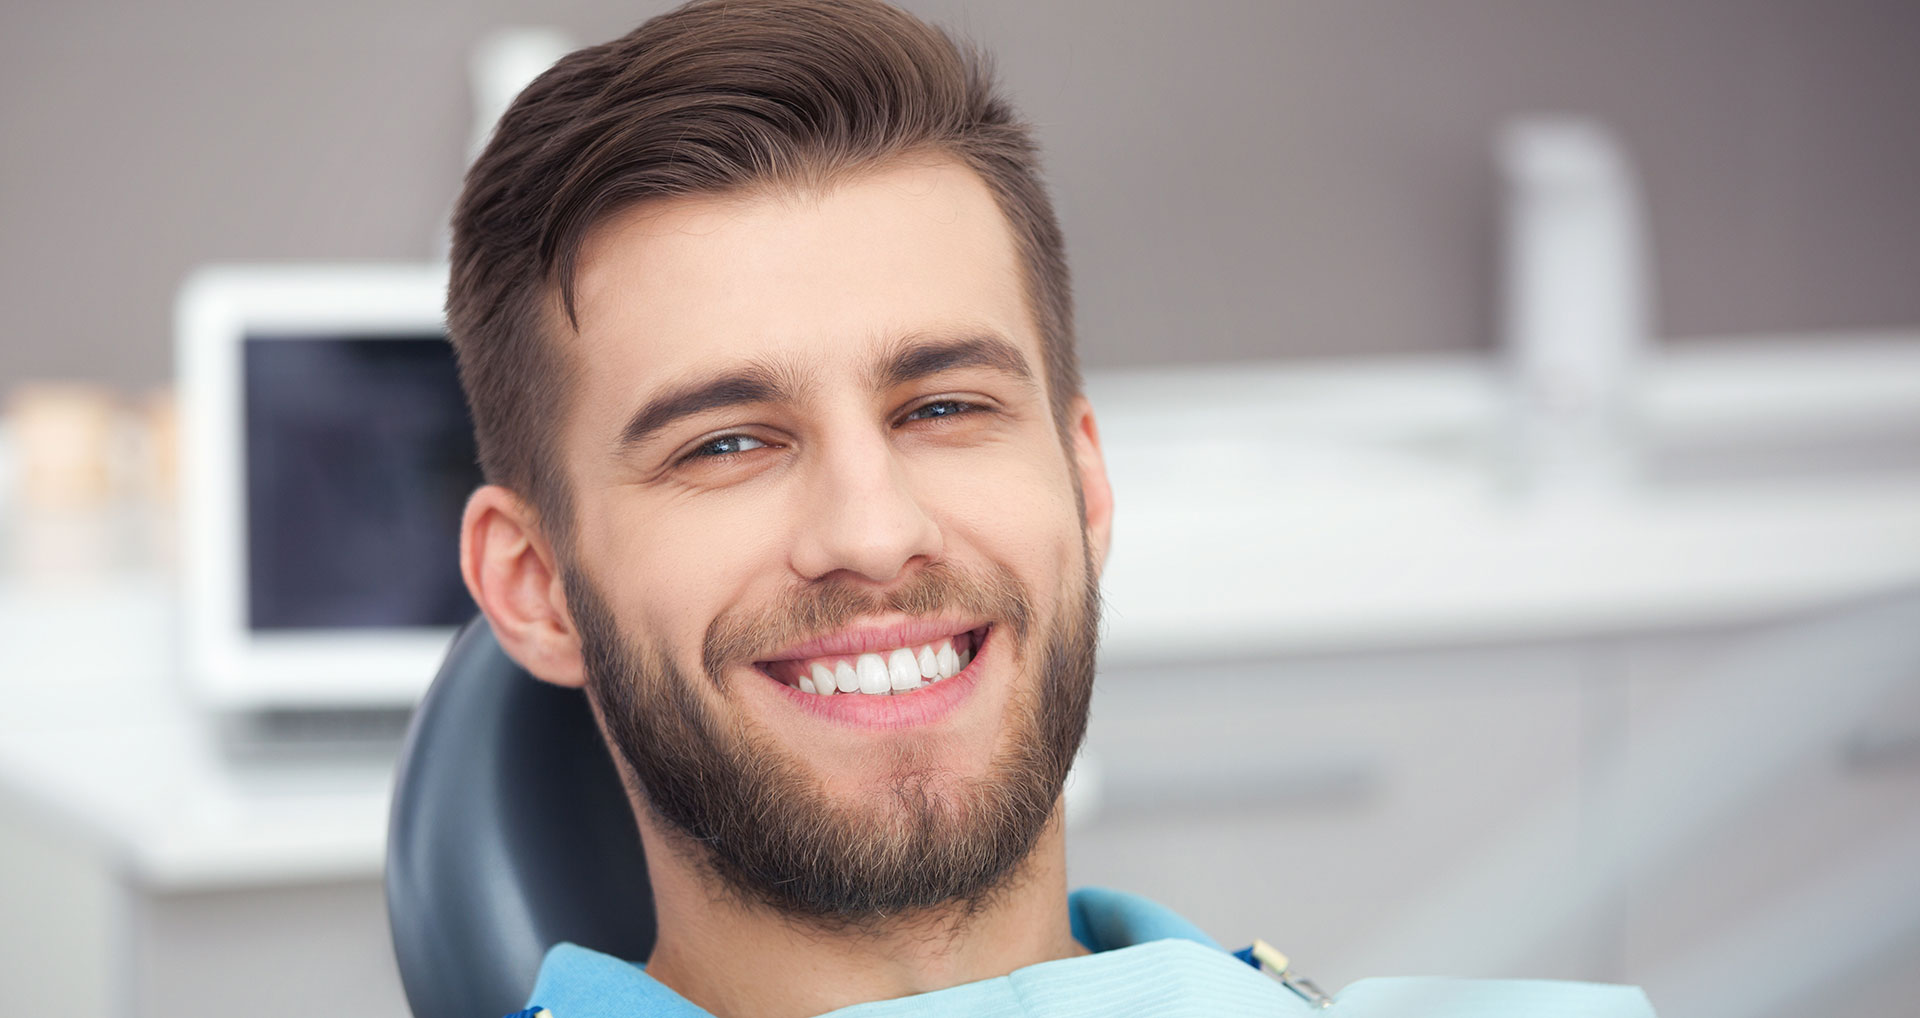 A smiling man in a dental office, wearing an apron and sitting at the chair.